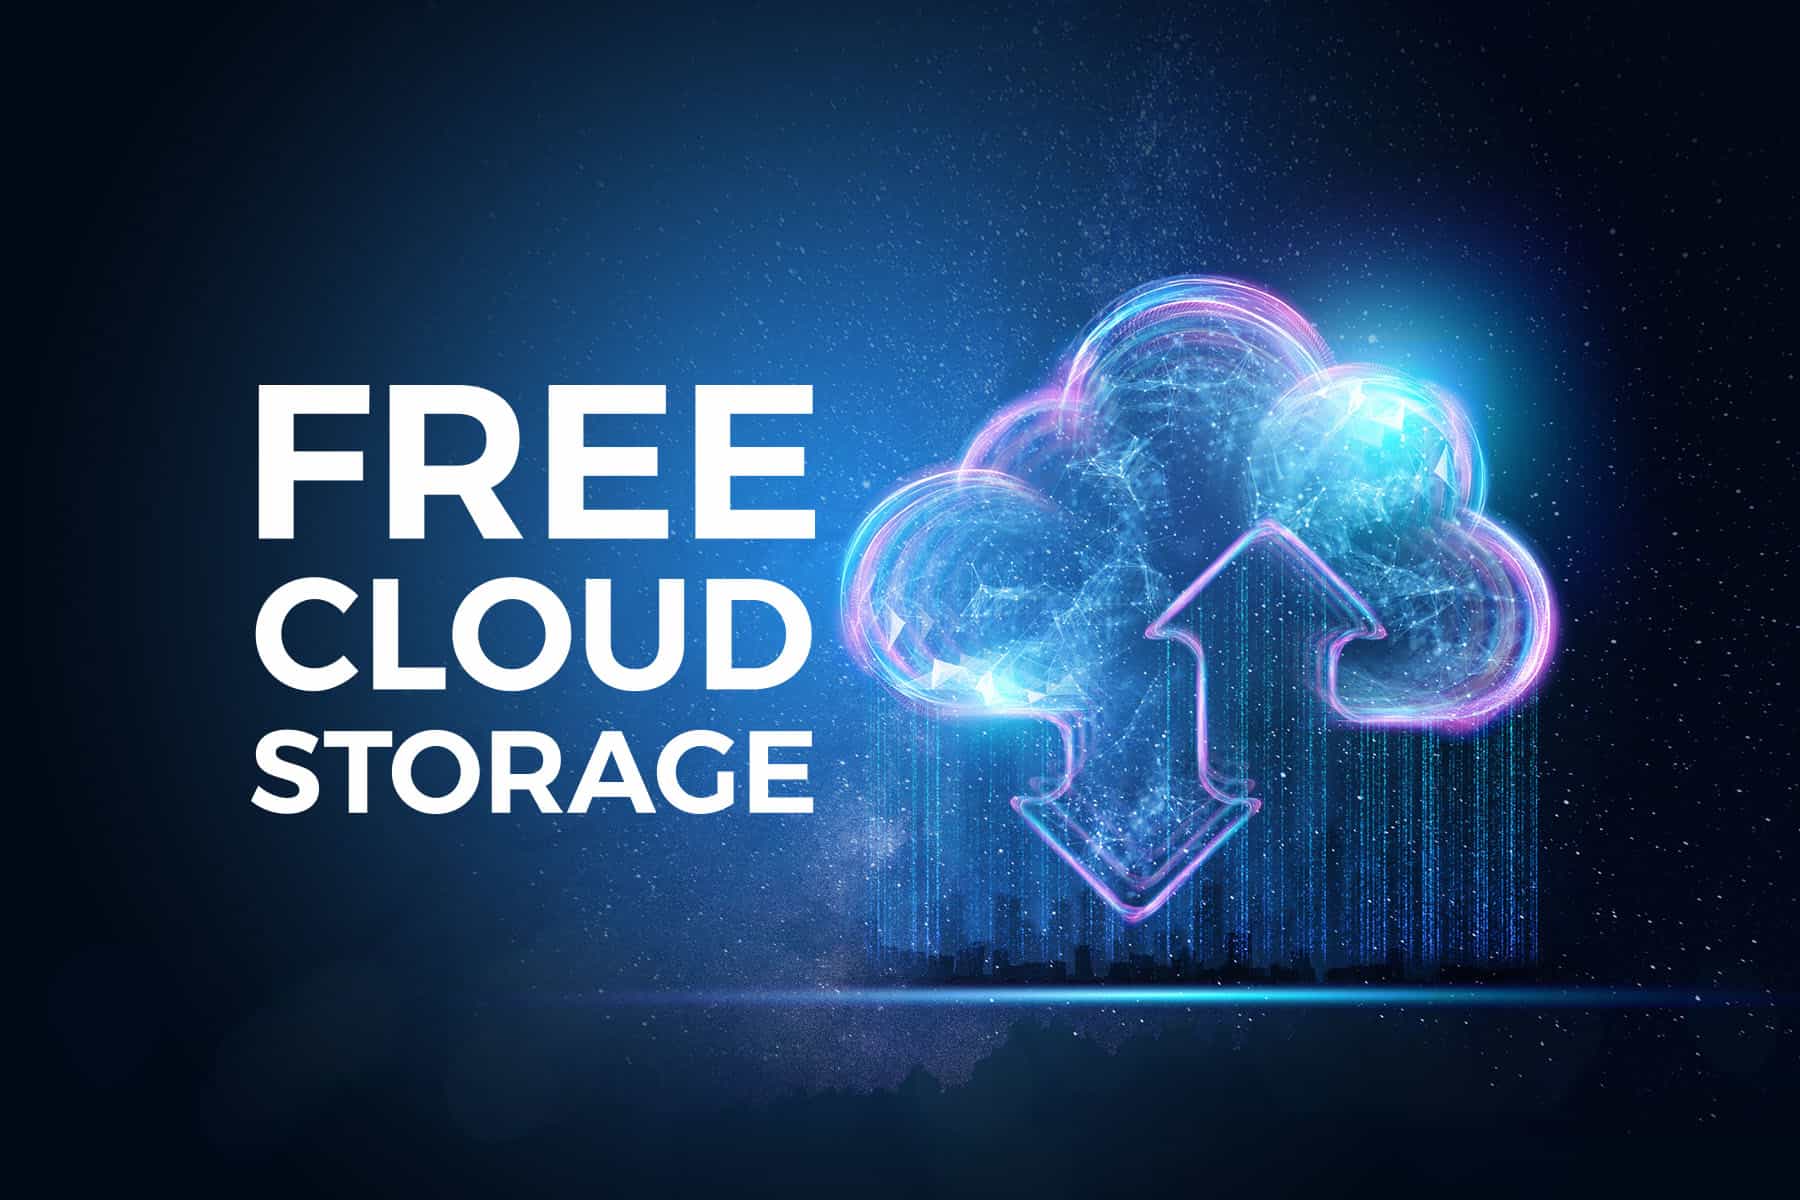 Free Cloud Storage Offer from Actian